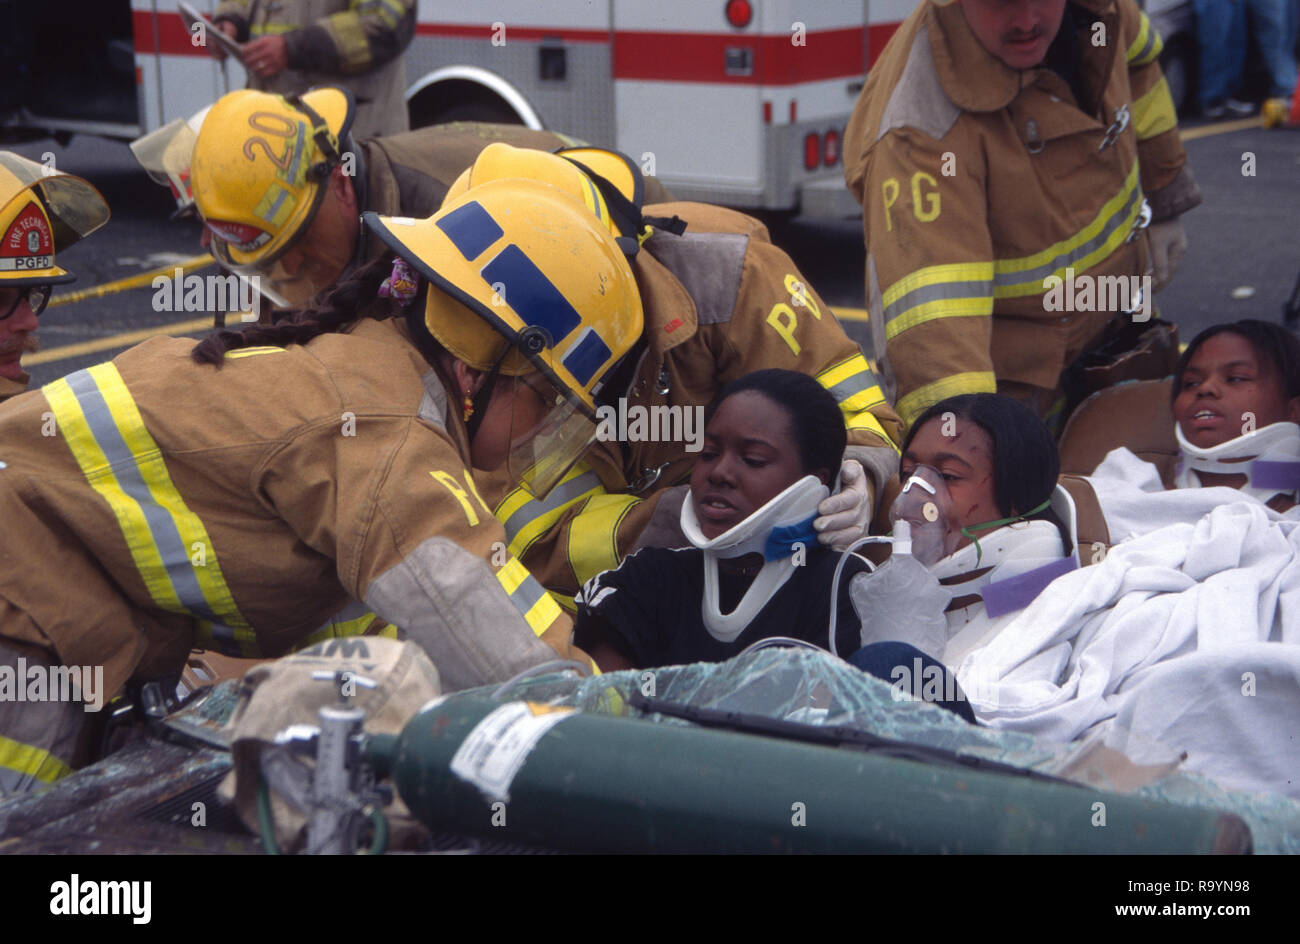 Firefighters work on rescuing injured people injured in an auto accident Stock Photo